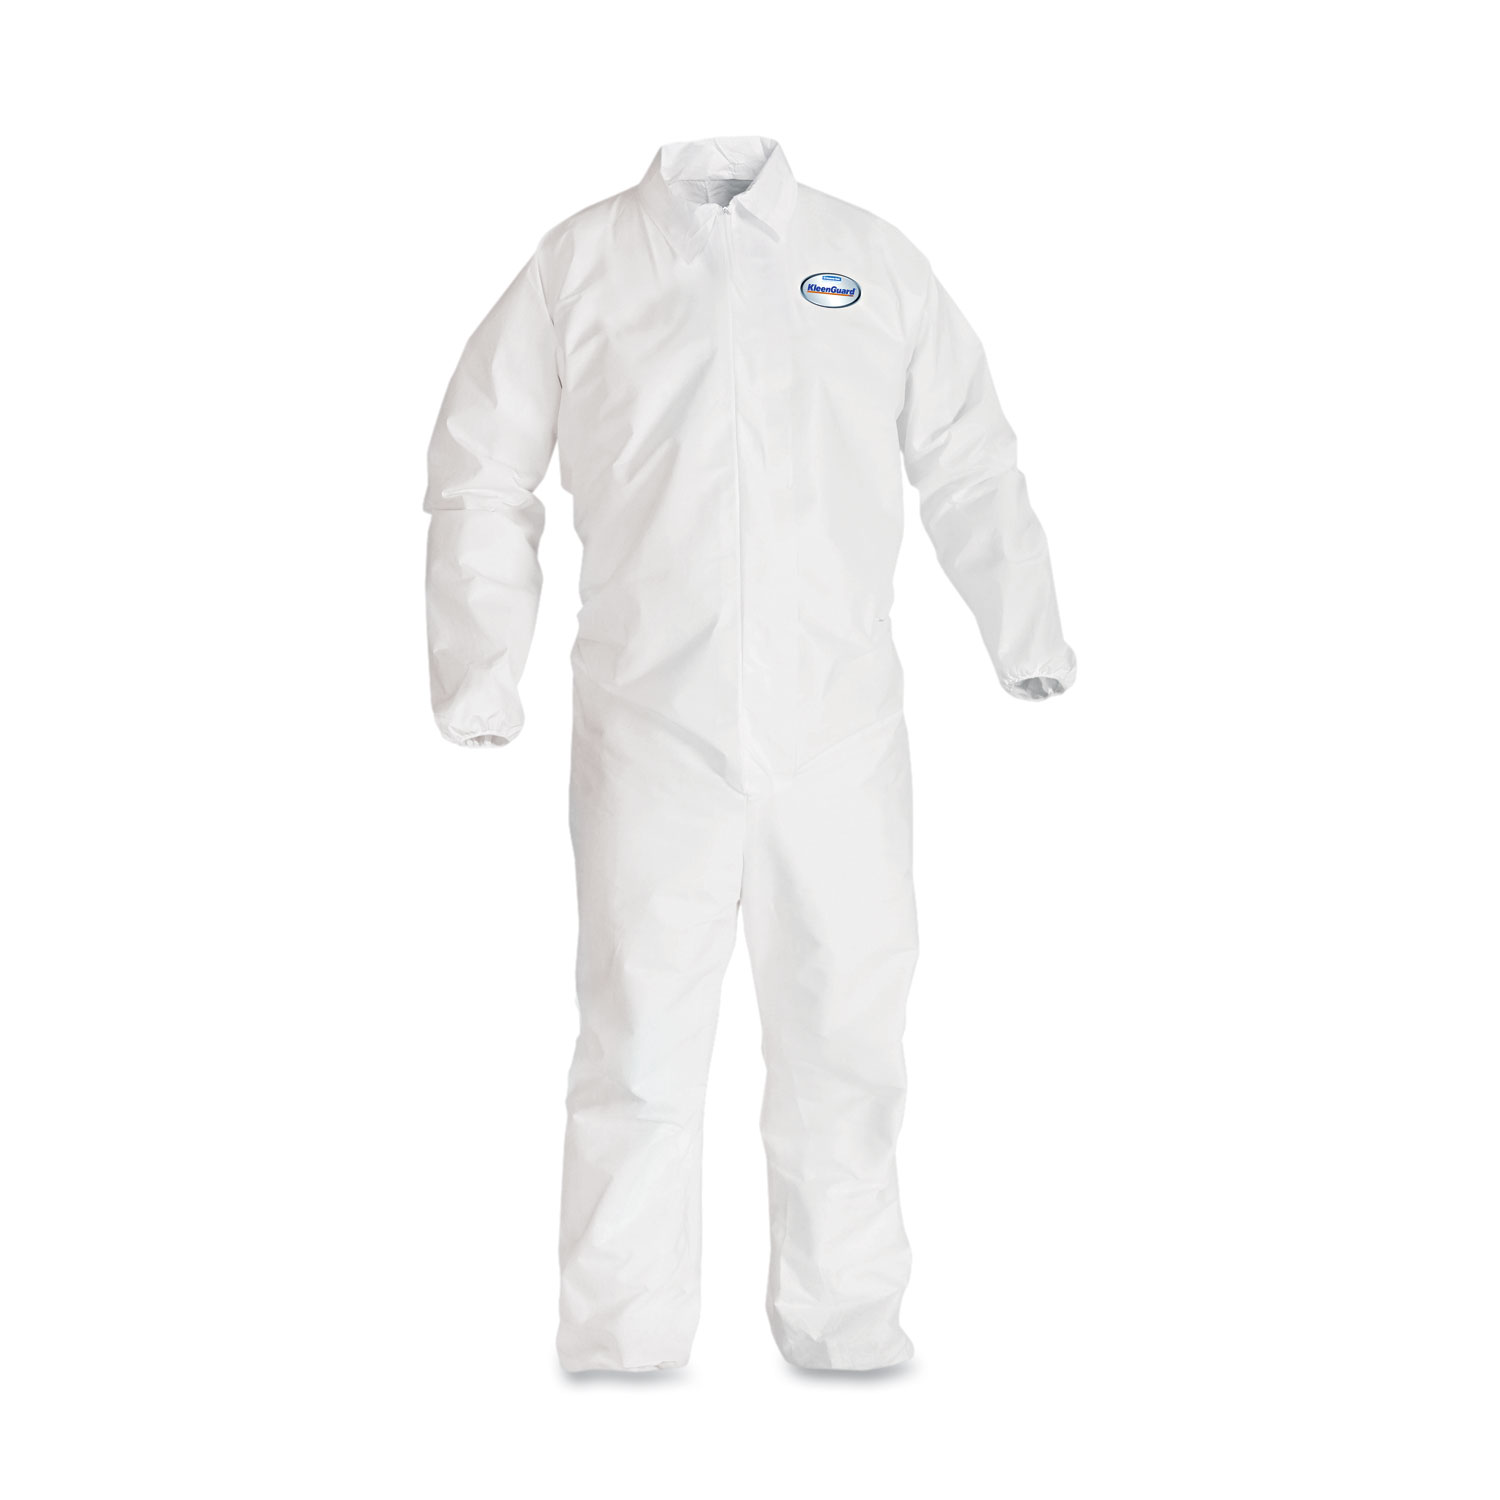 A40 Elastic-Cuff and Ankles Coveralls, White, Large, 25/Case